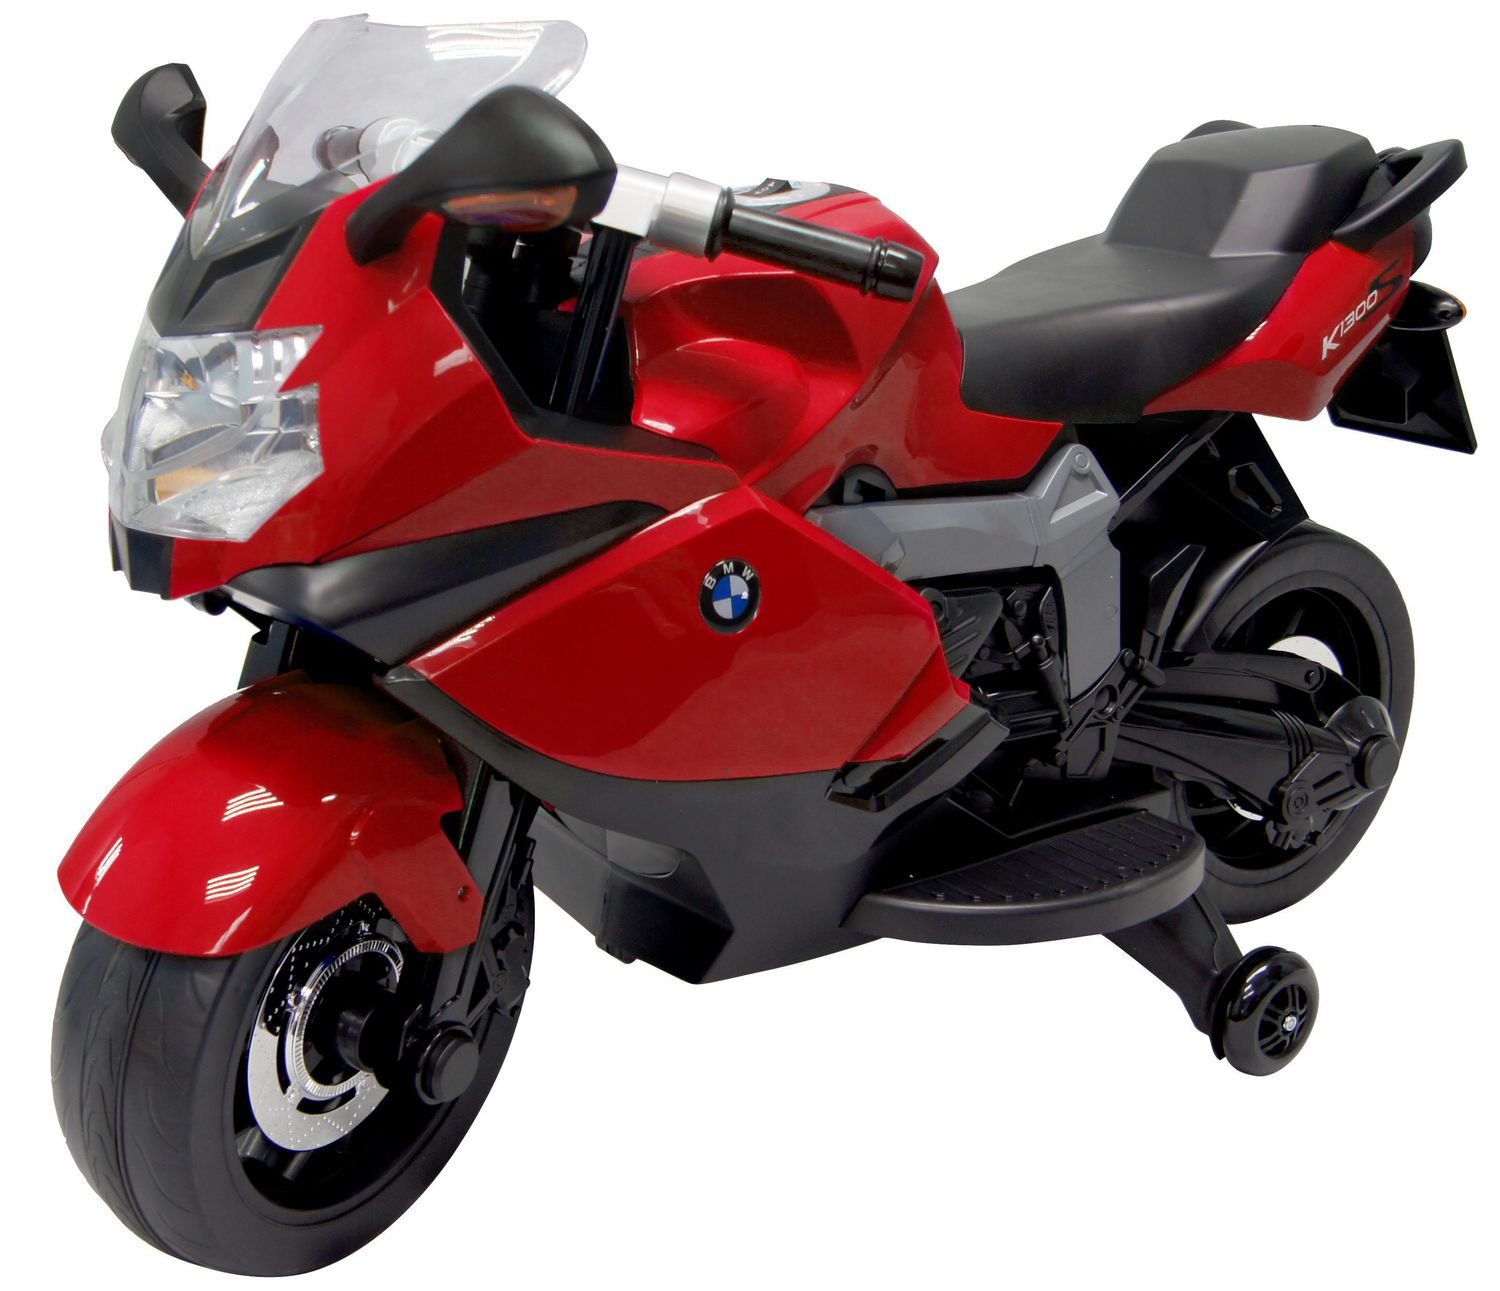 BMW Ride On Motorcycle 12V - Red | Walmart Canada